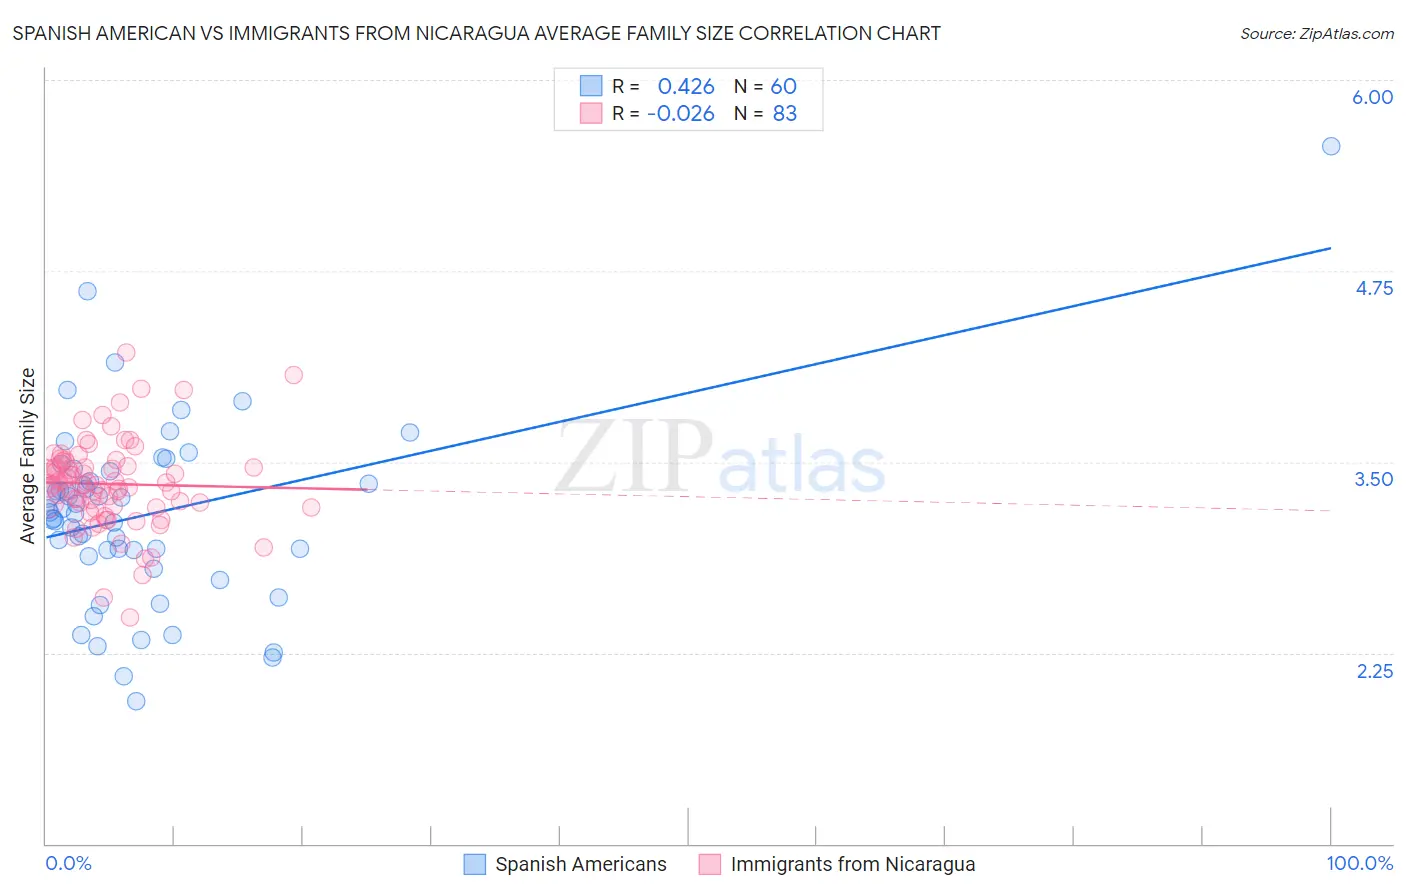 Spanish American vs Immigrants from Nicaragua Average Family Size